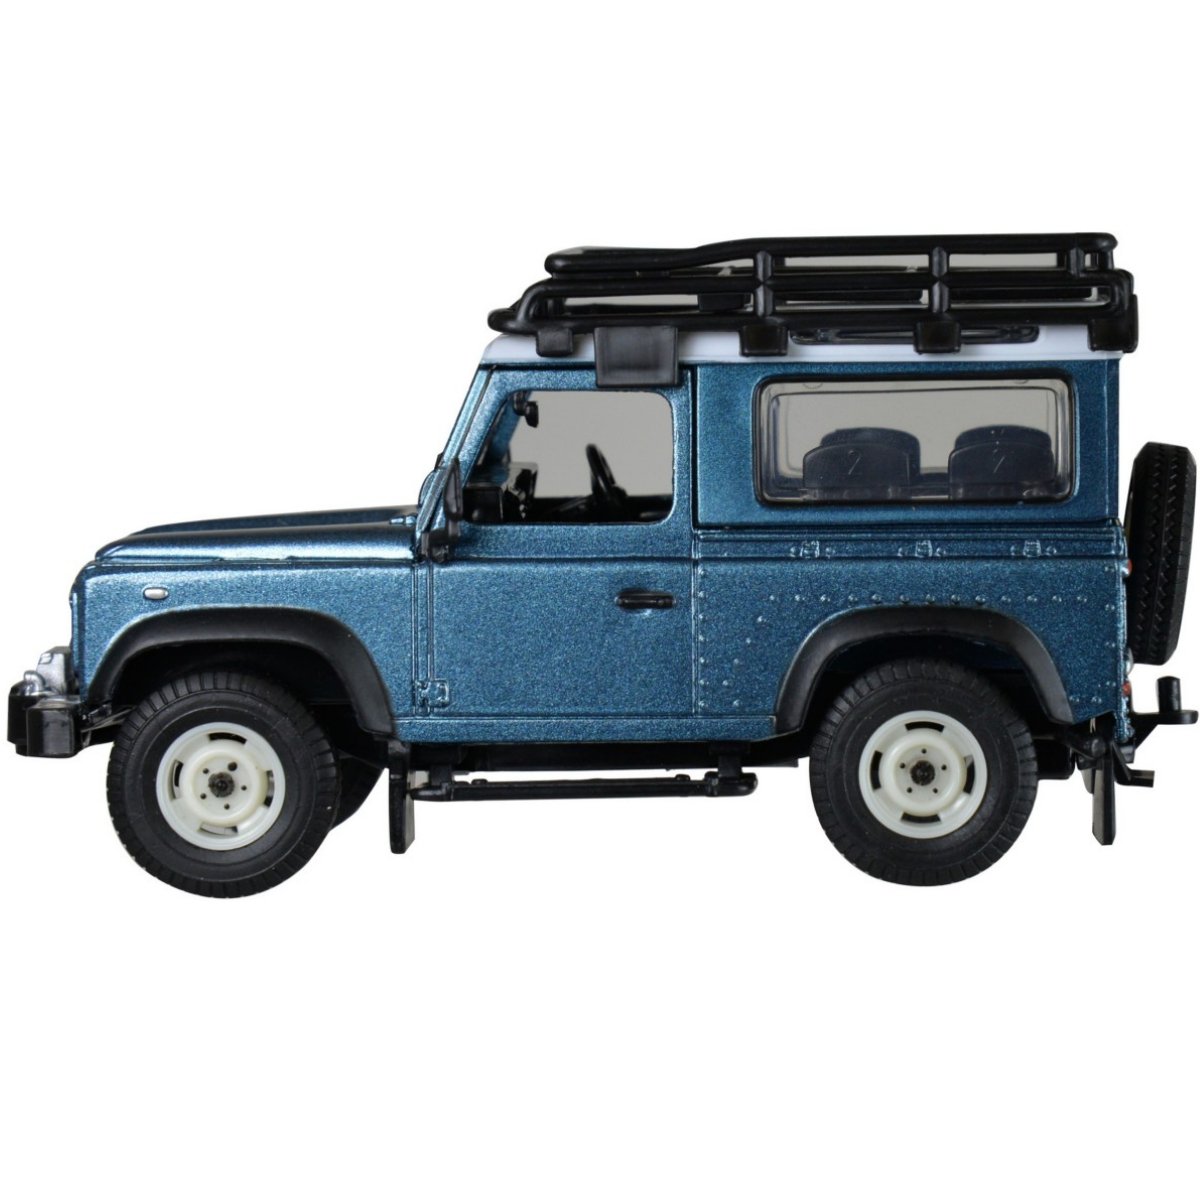 Britains Land Rover Defender & Roof Rack & Winch - 1:32 Scale - Phillips Hobbies